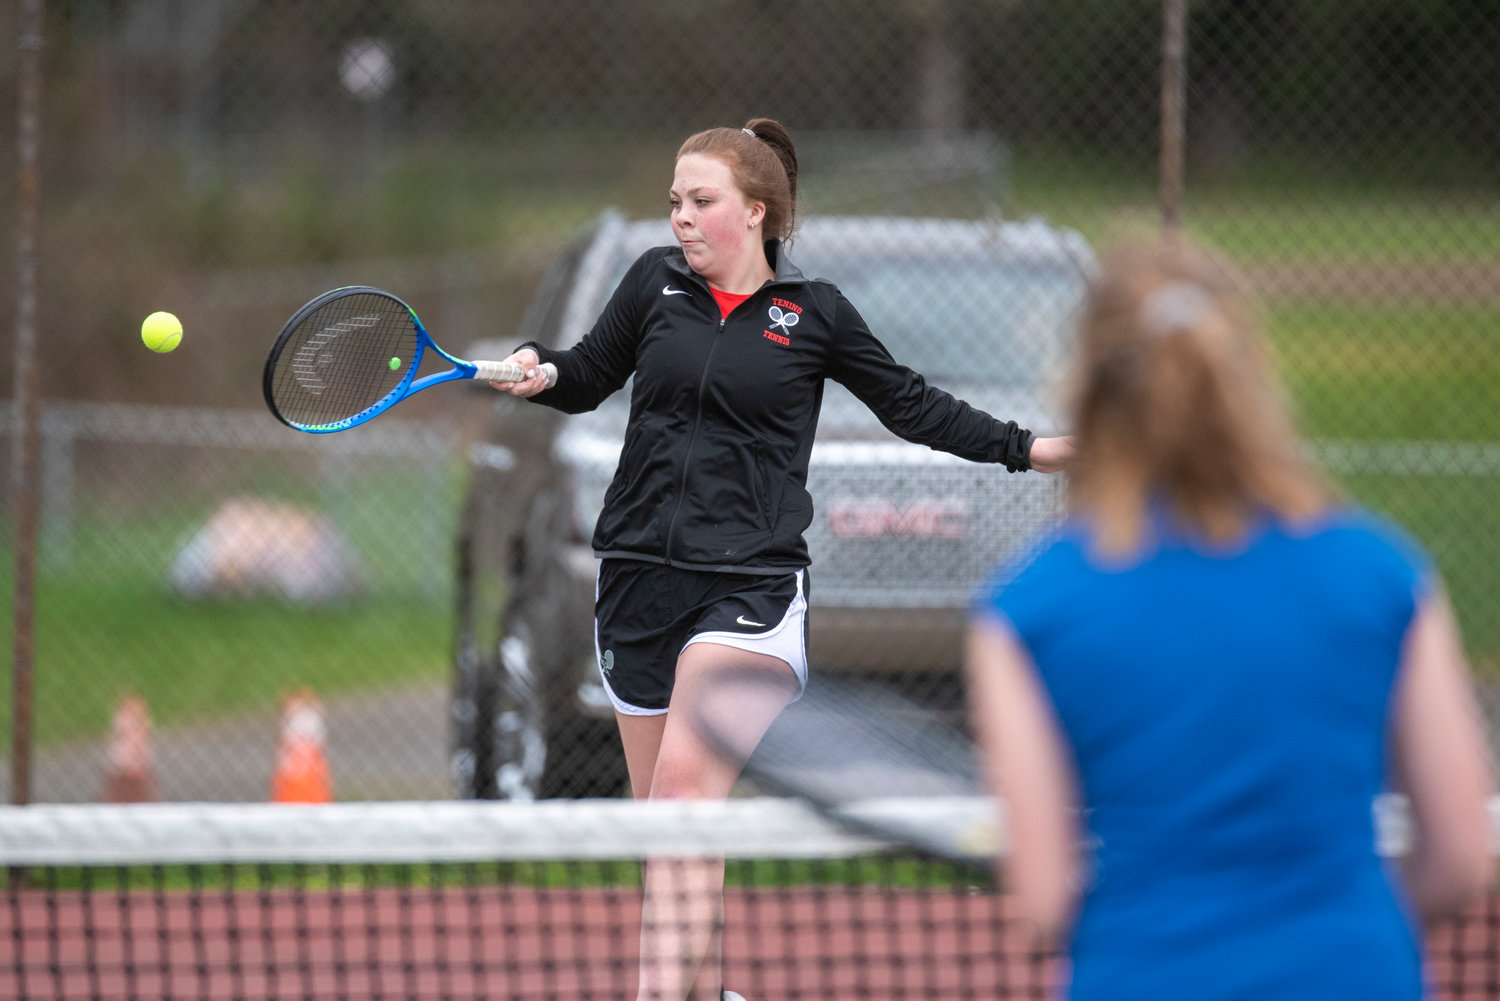 Tenino's Destiny Sampley returns a hit from an Eatonville player in the No. 1 doubles match at home on March 29.